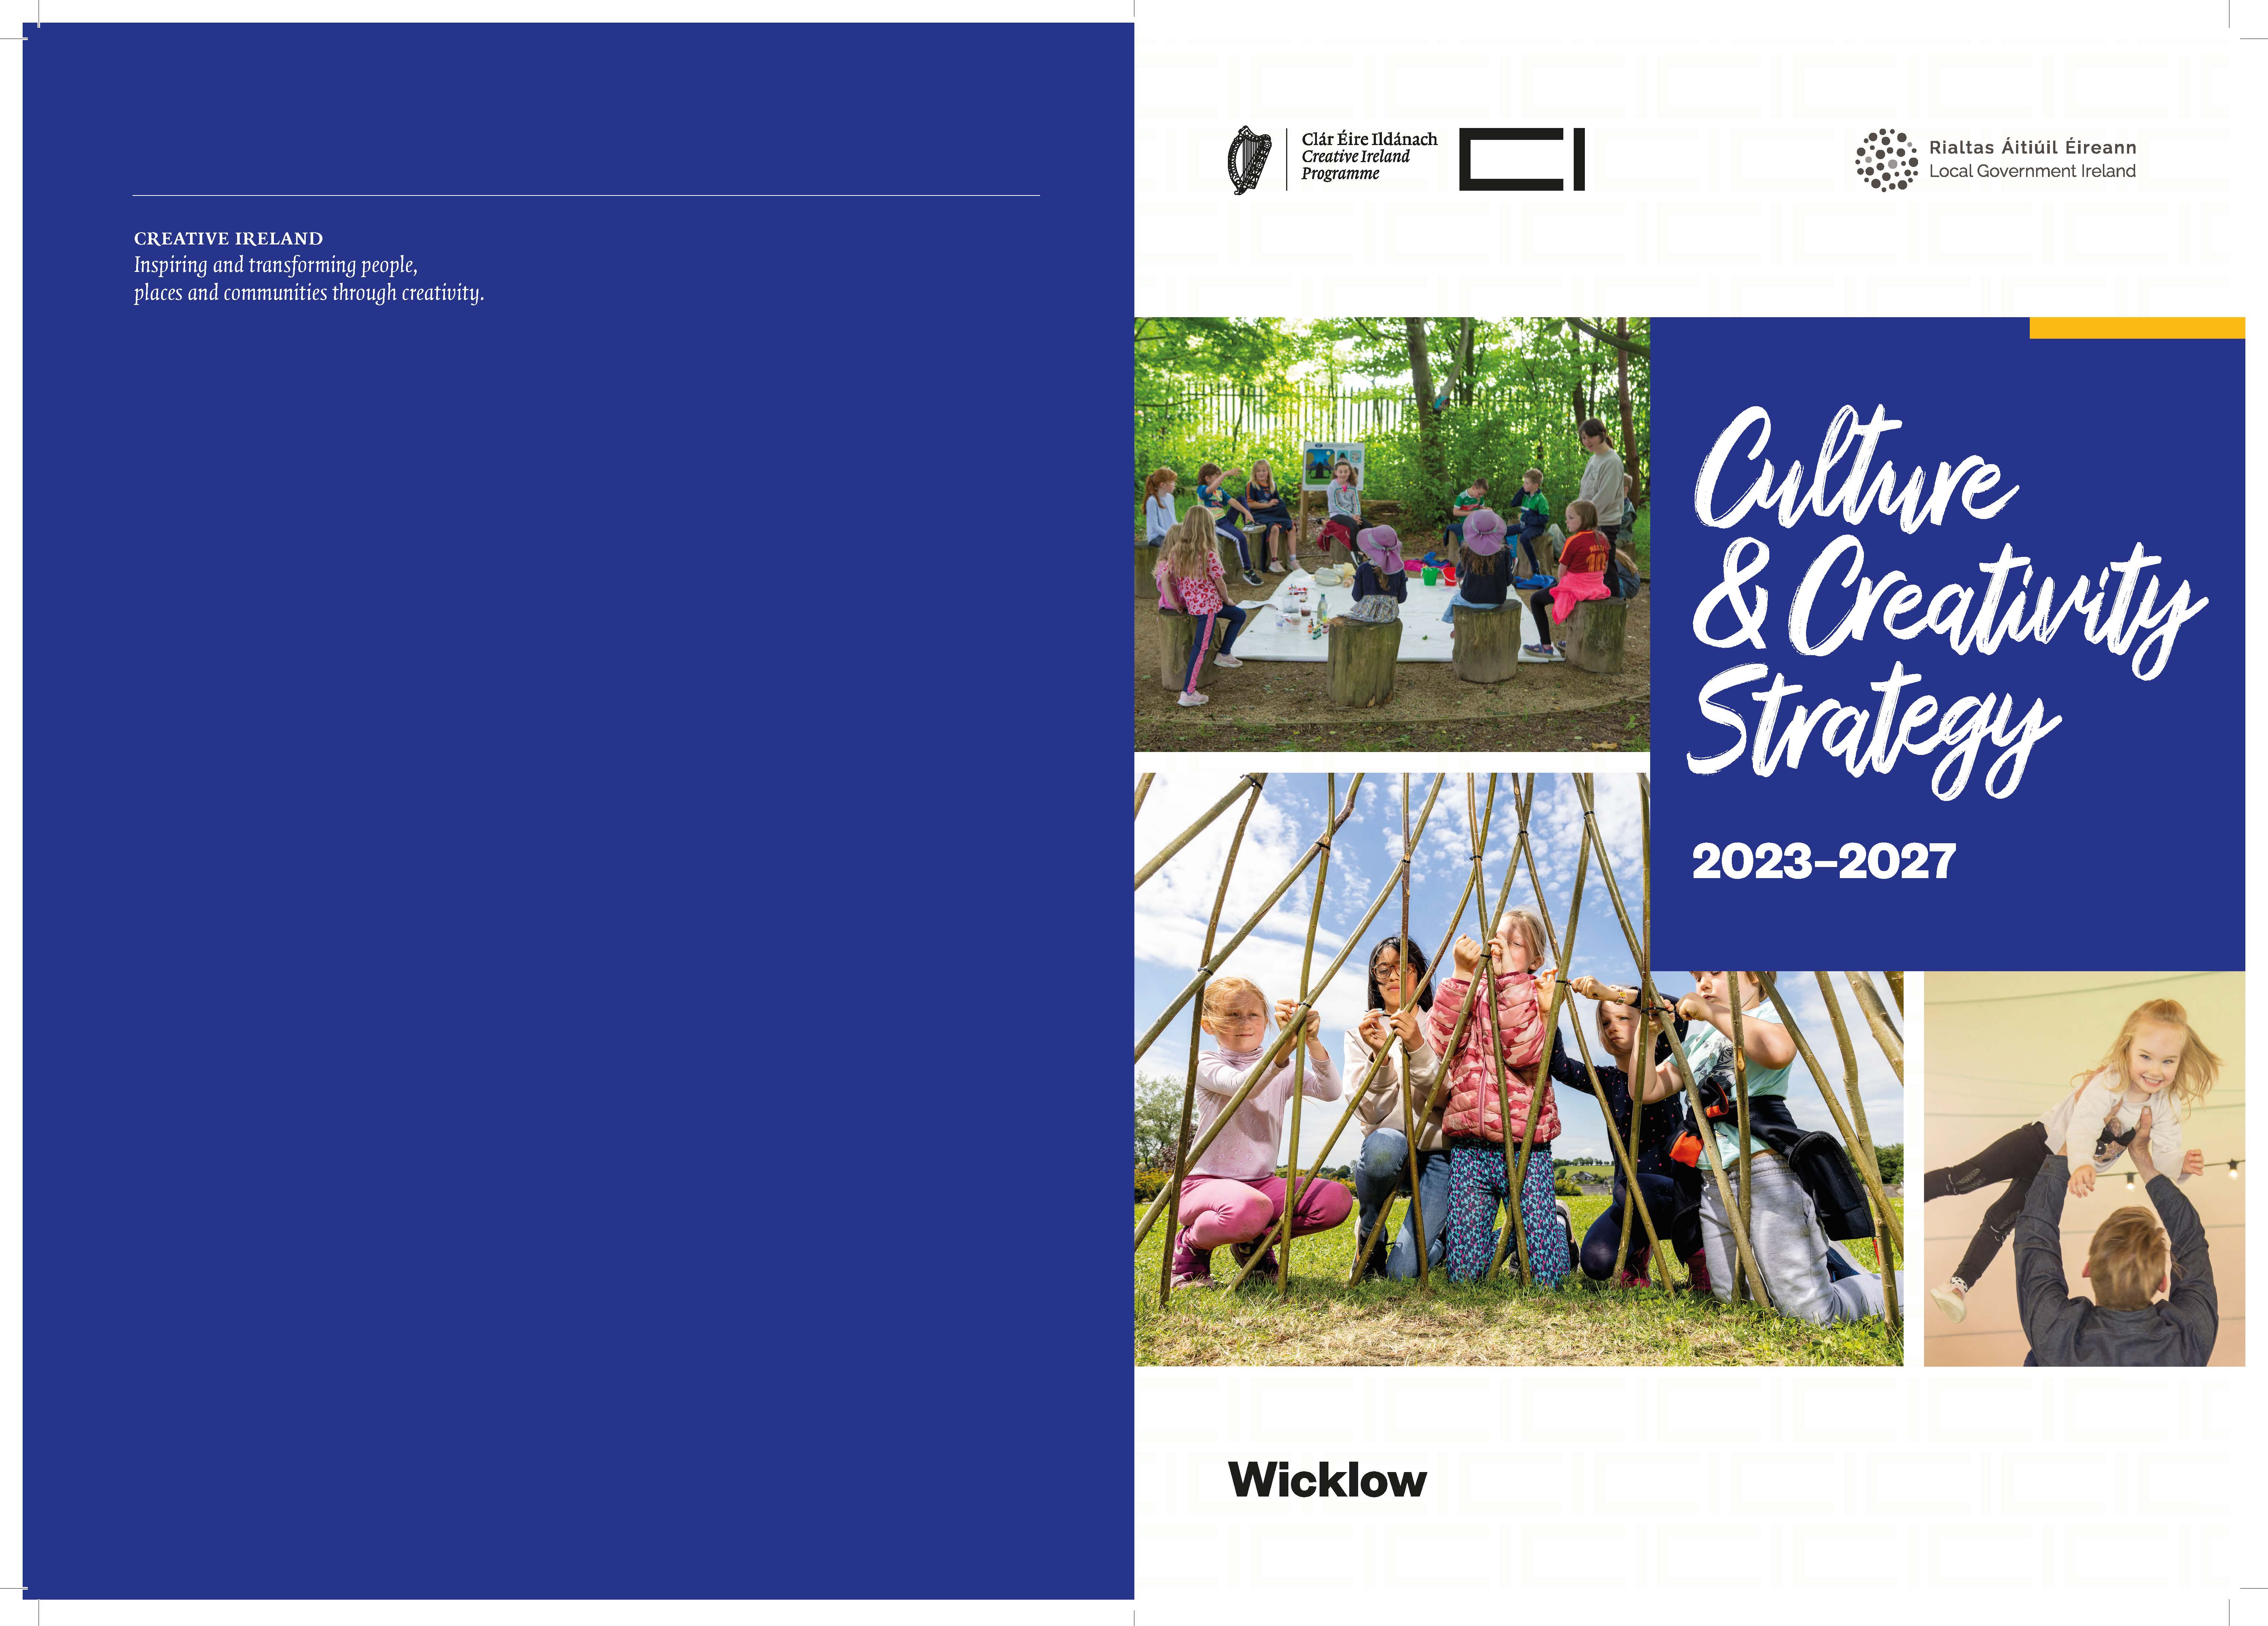 Wicklow Culture and Creativity Strategies 2023-2027